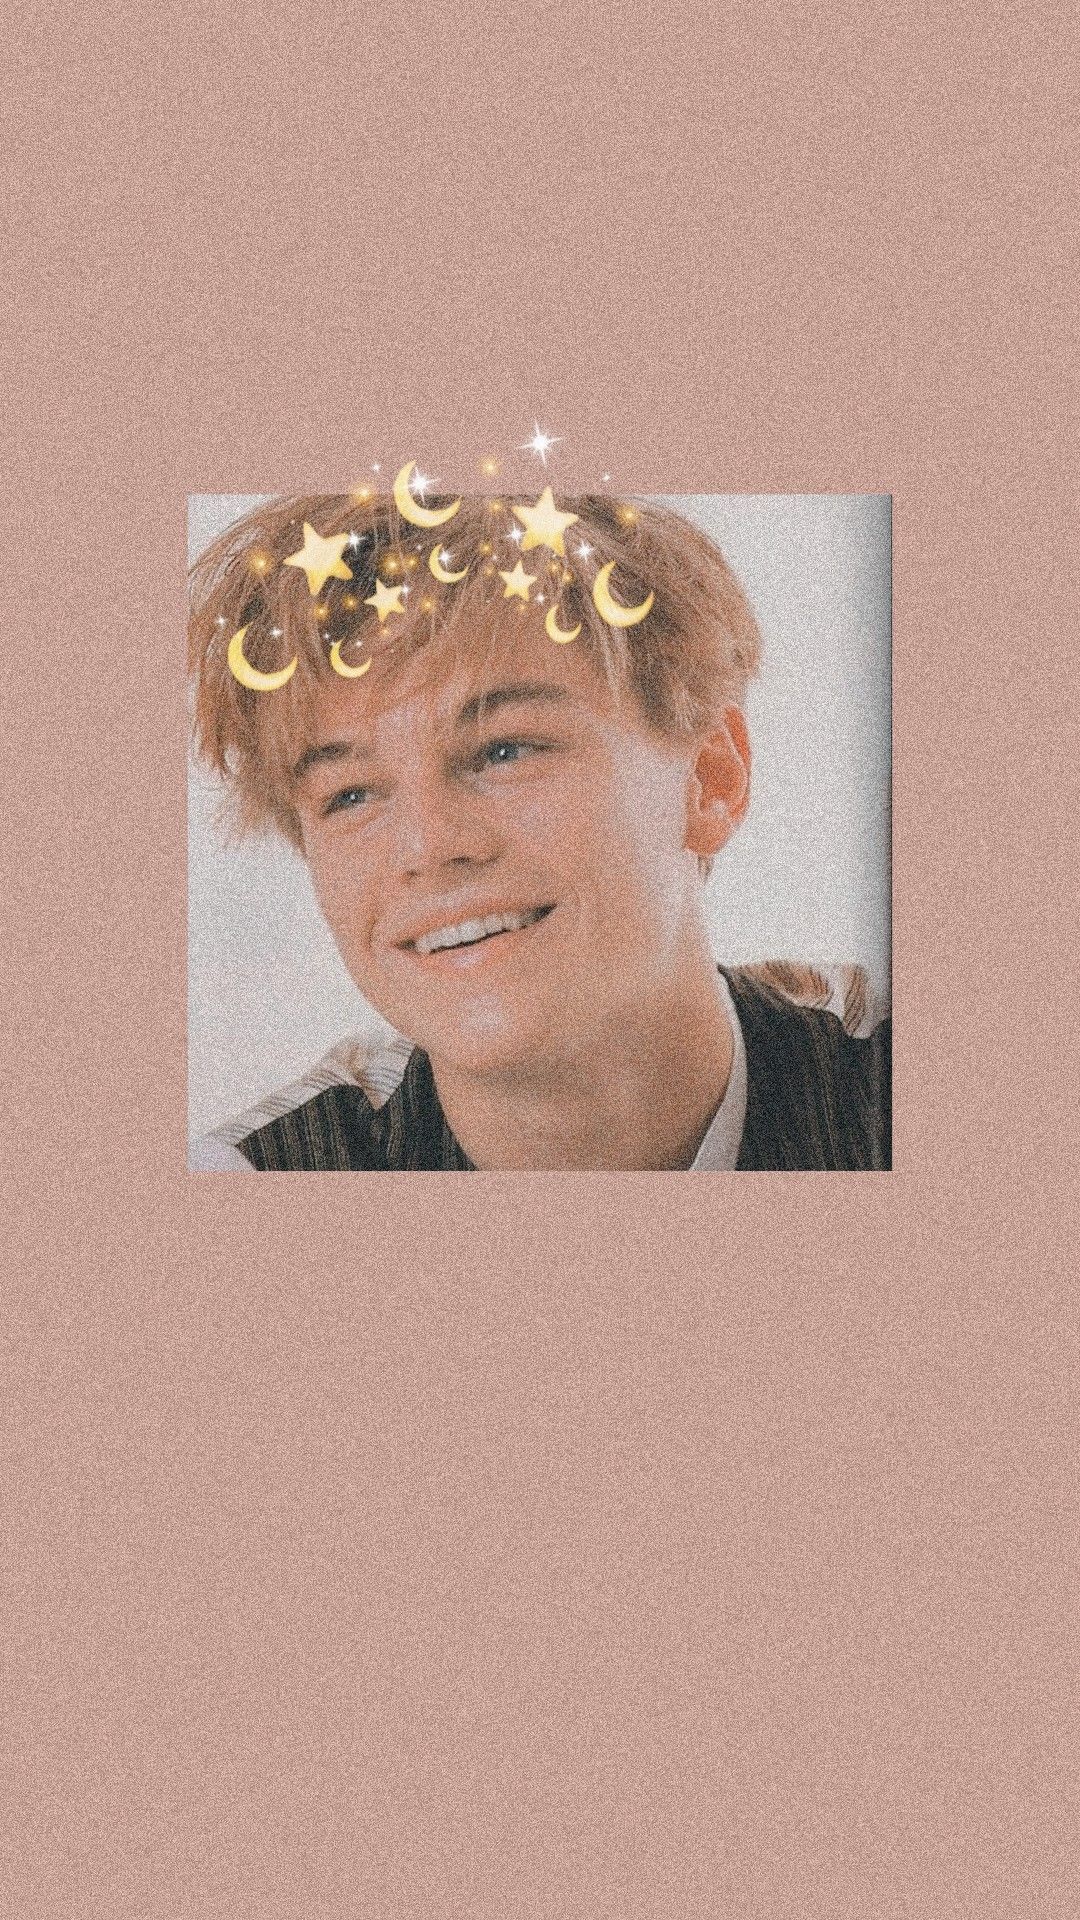 IPhone wallpaper of a smiling Leonardo DiCaprio with a gold crown of moons and stars - Leonardo DiCaprio